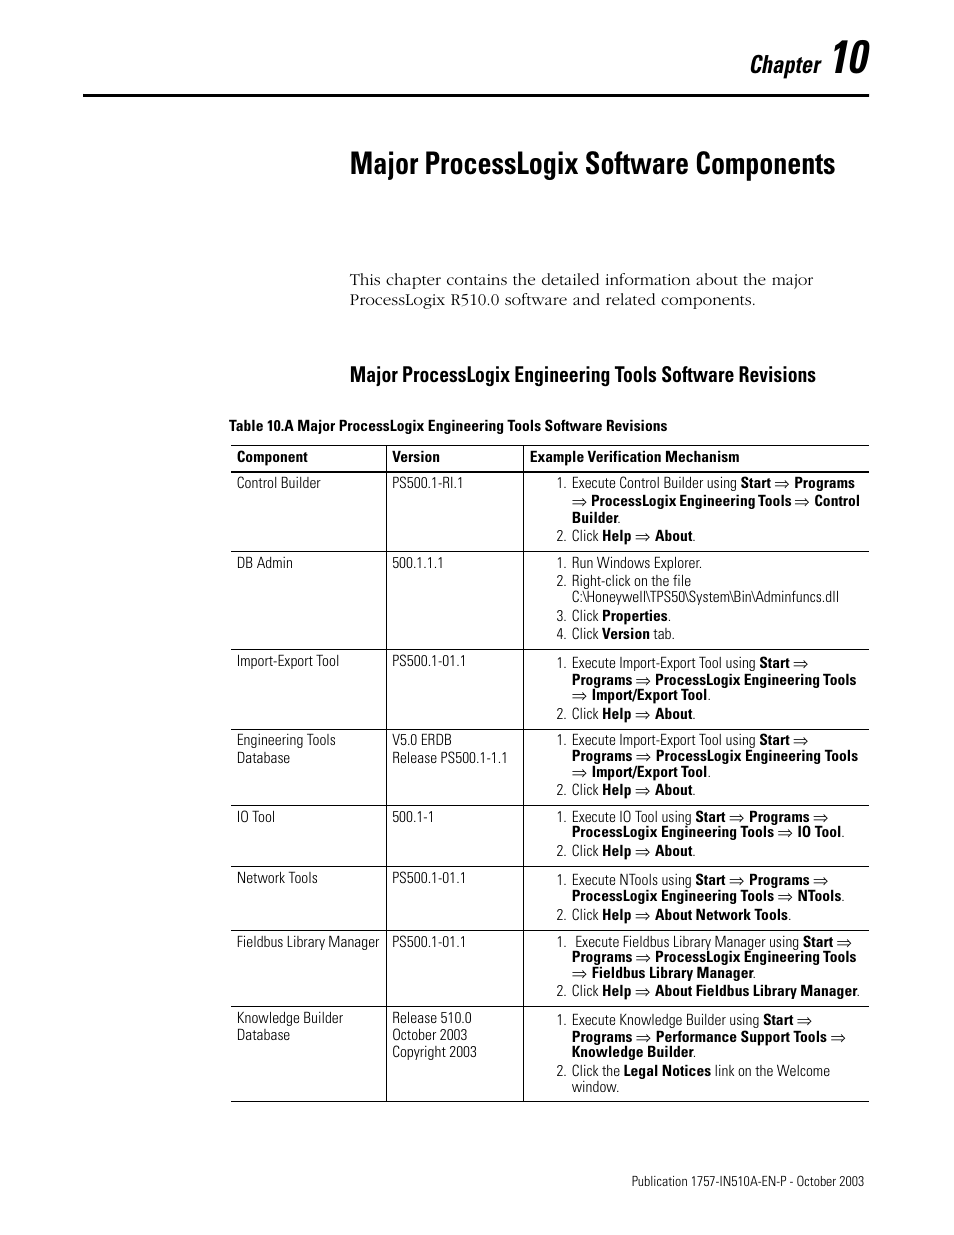 10 - major processlogix software components, Chapter 10, Major processlogix software components | Major processlogix engineering tools software, Revisions -1, Chapter | Rockwell Automation 1757-SWKIT5100 ProcessLogix R510.0 Installation and Upgrade Guide User Manual | Page 235 / 271